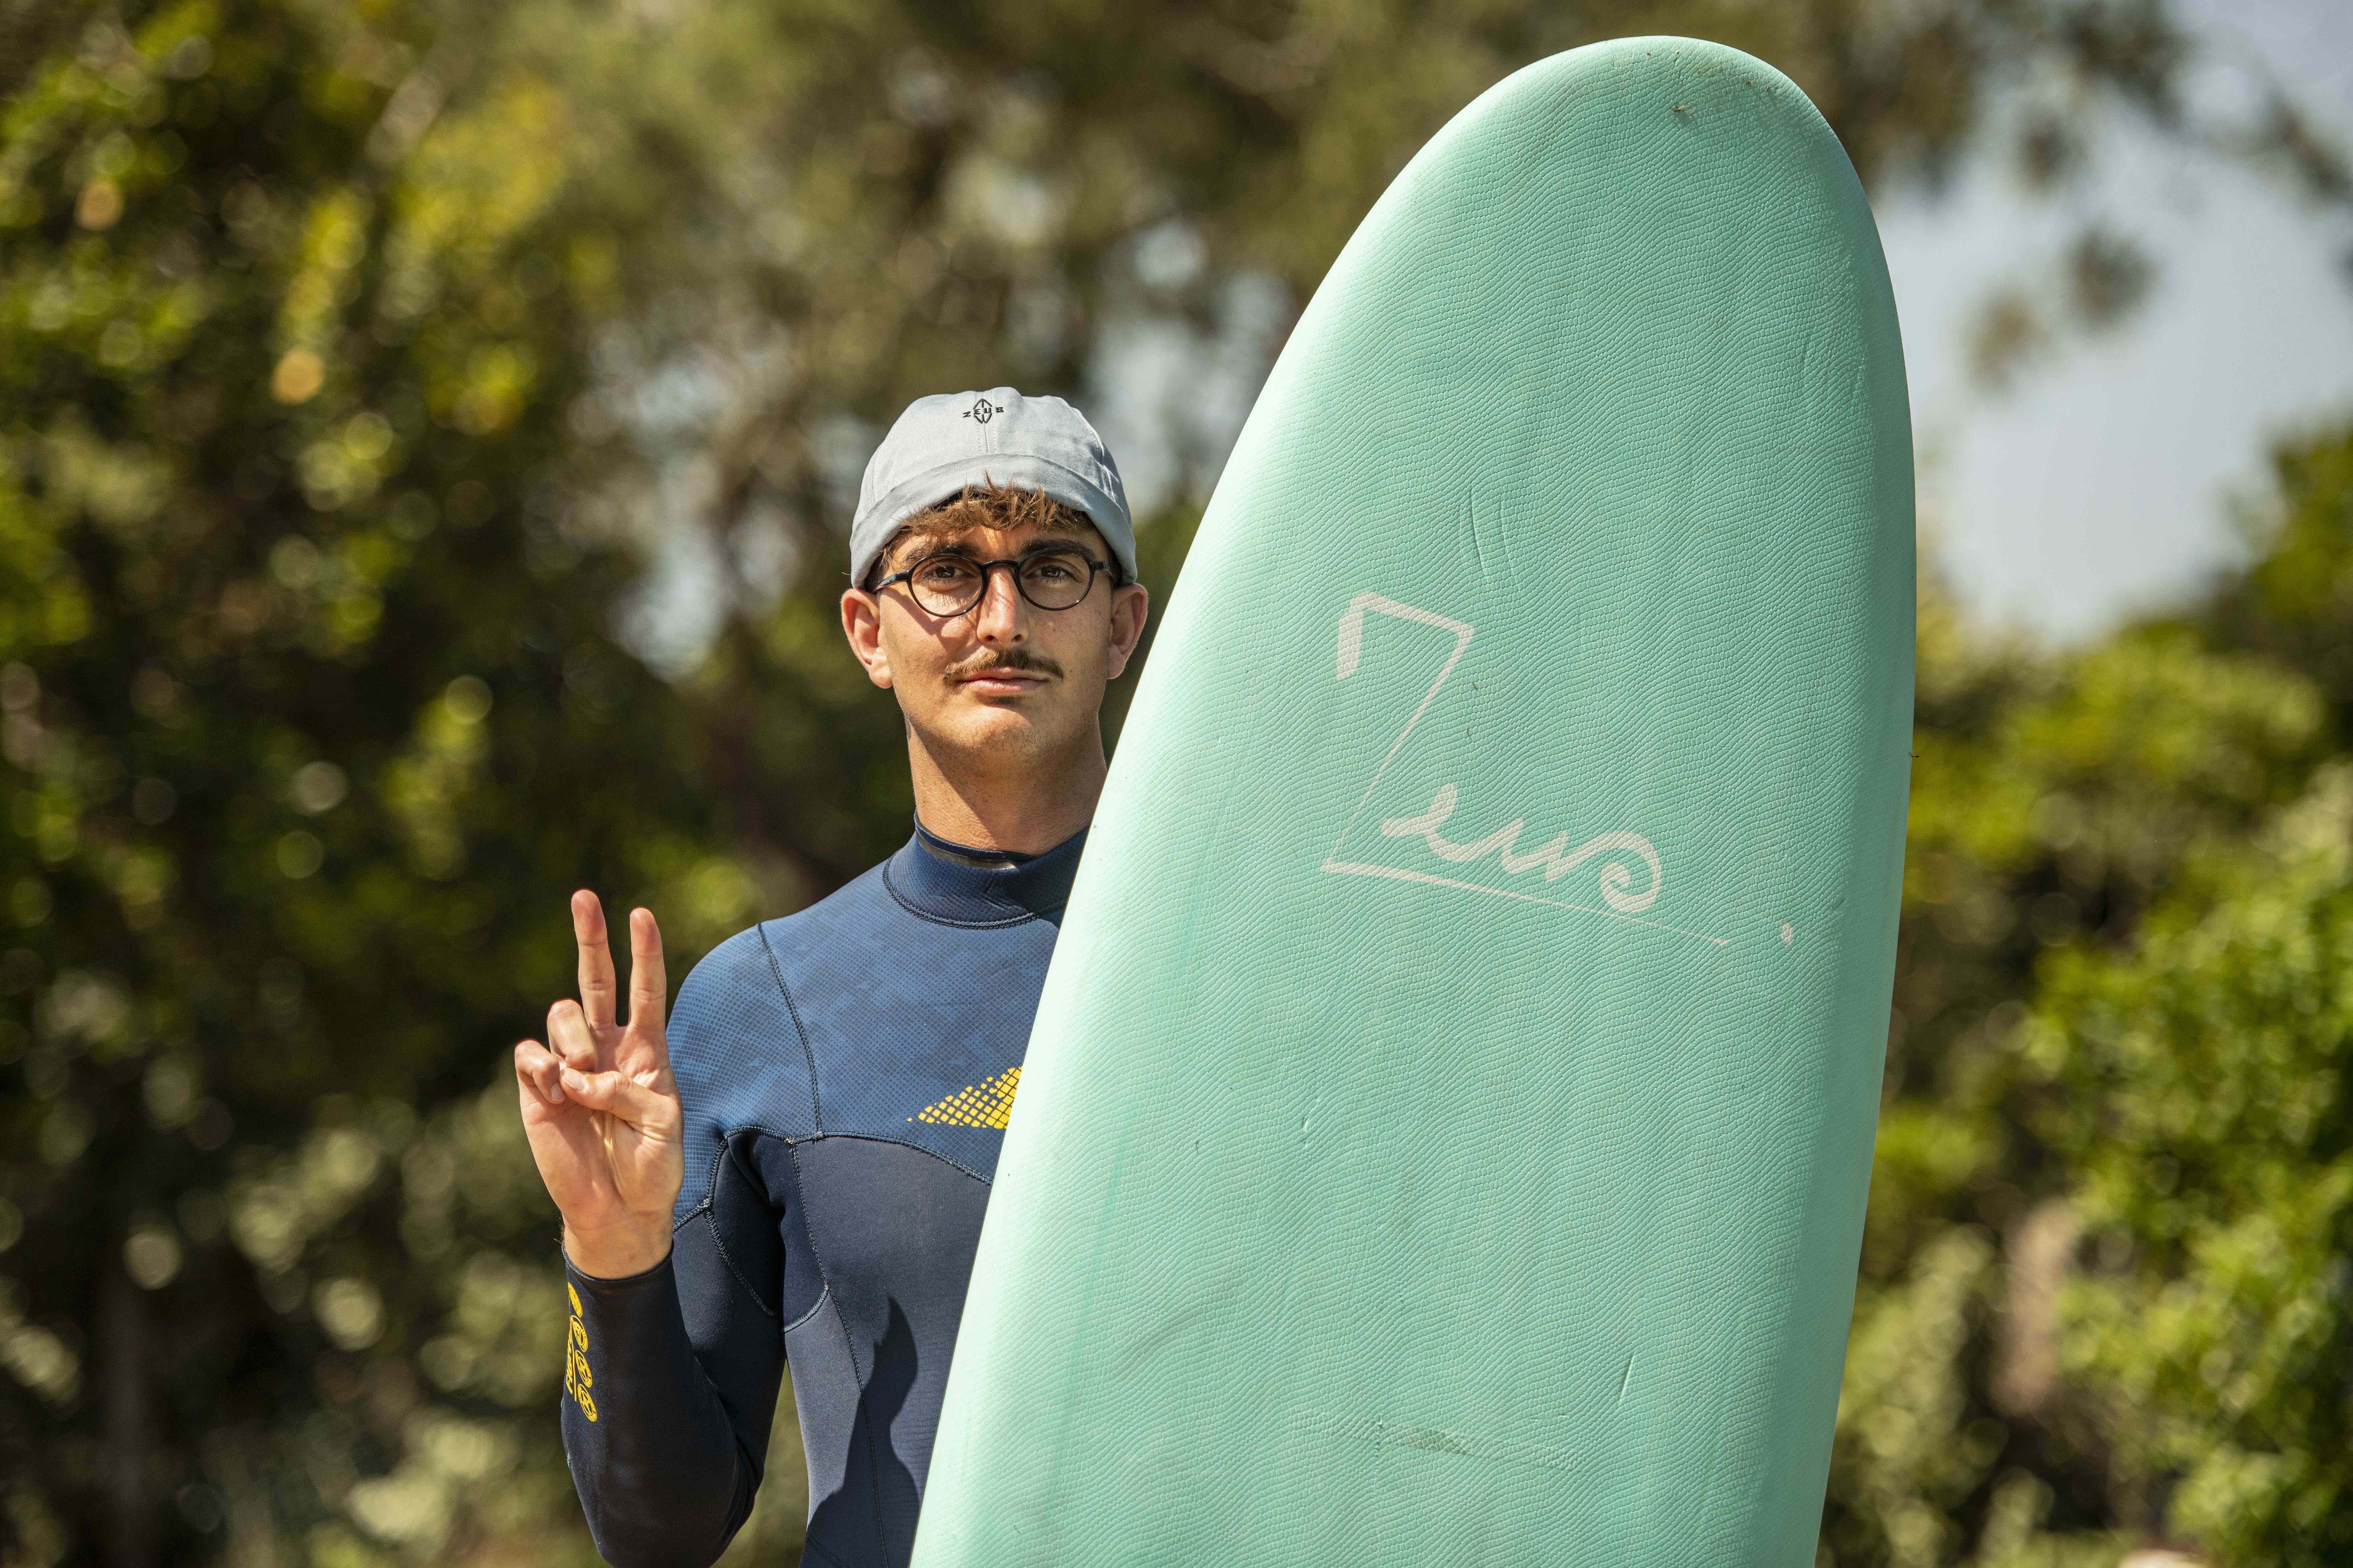 Green Mini Mlaiby Zeus Surfboard - How to choose a surfboard